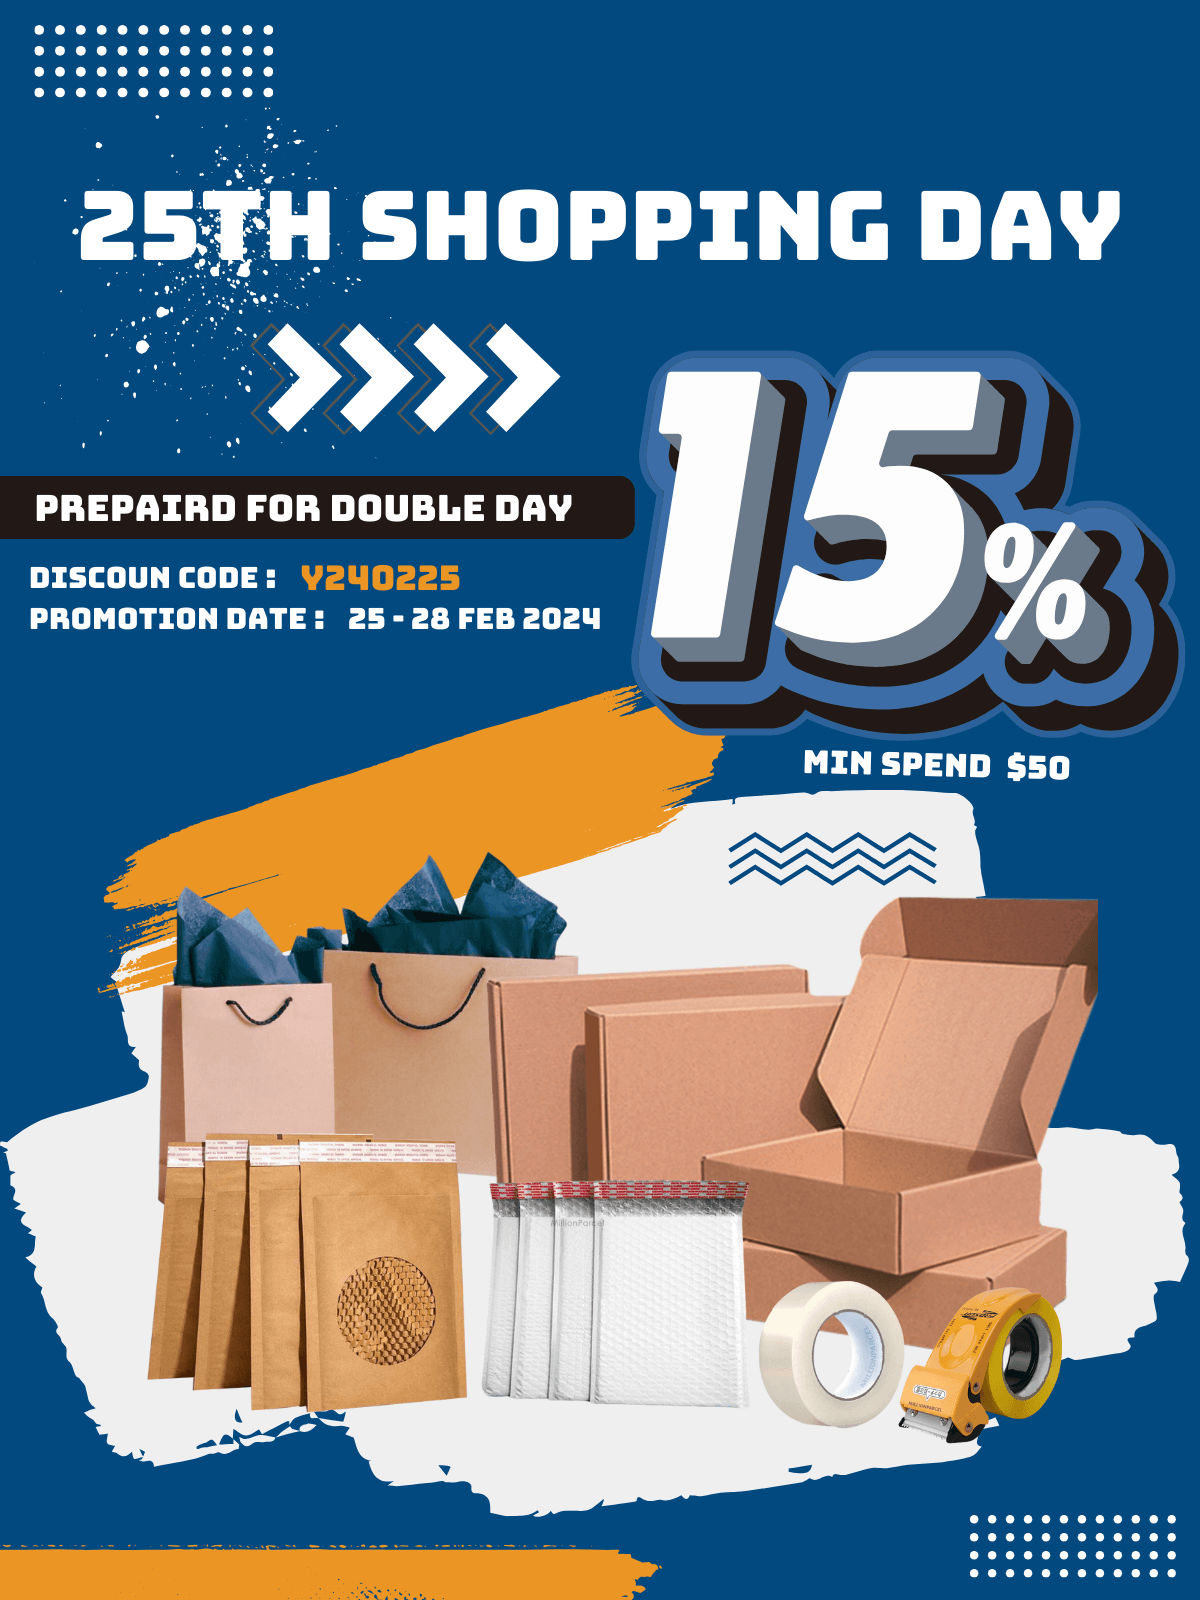 💵 Unlock 15% Savings on Your 25th Shopping Day😃 - MillionParcel